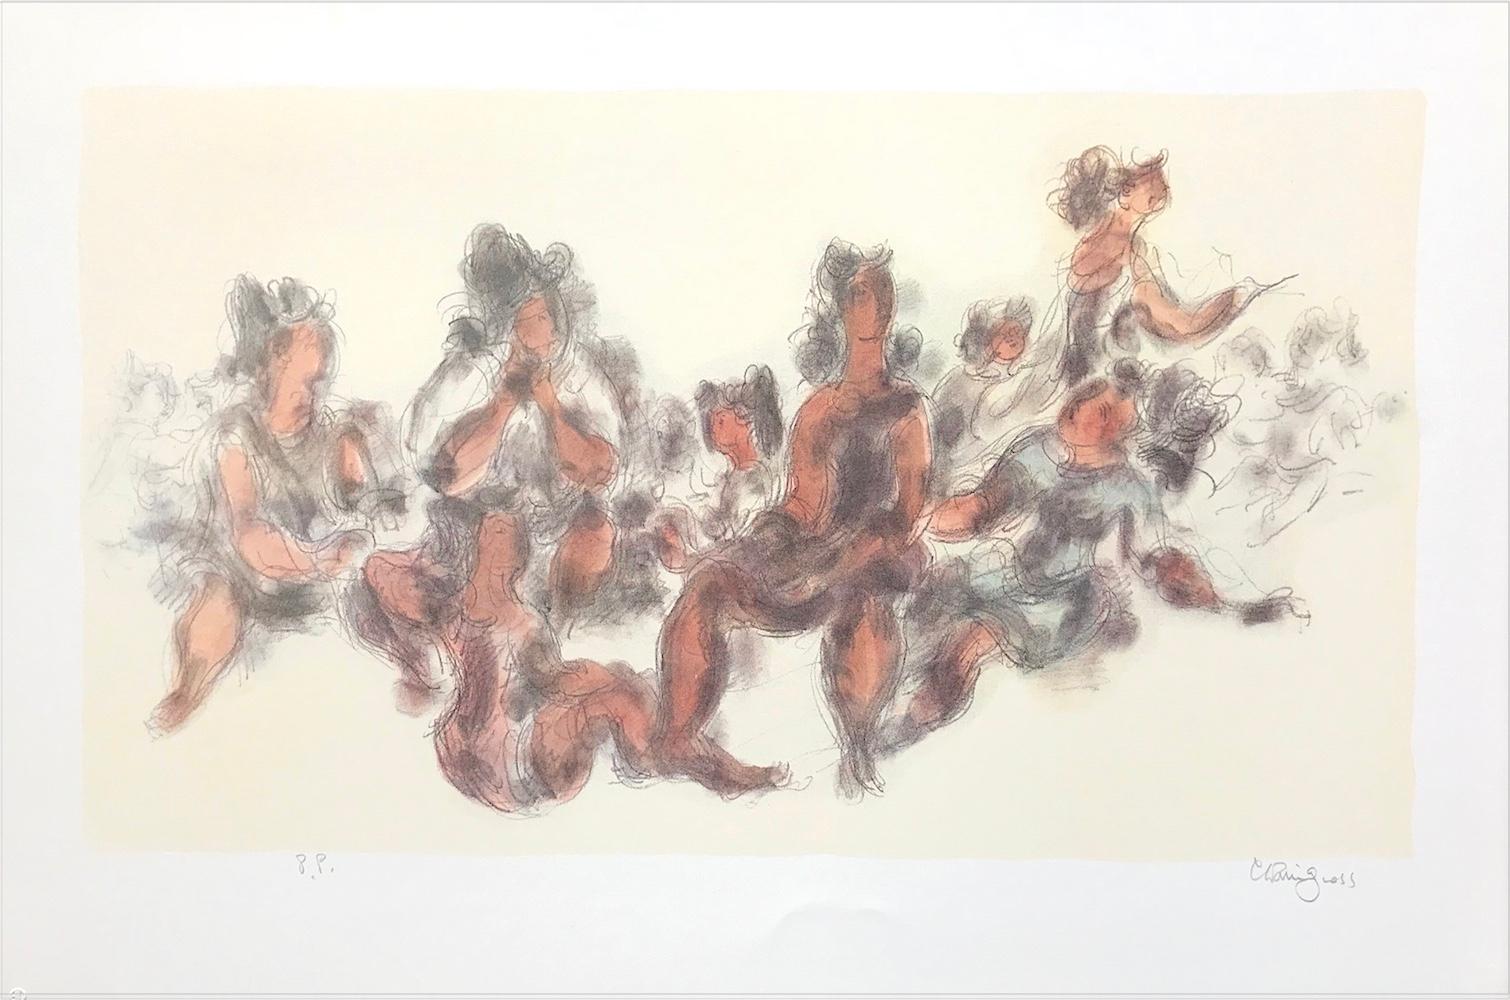 Chaim Gross Portrait Print - WOMEN TOGETHER Signed Lithograph Seated Female Figures, Cream, Gray, Terra Cotta